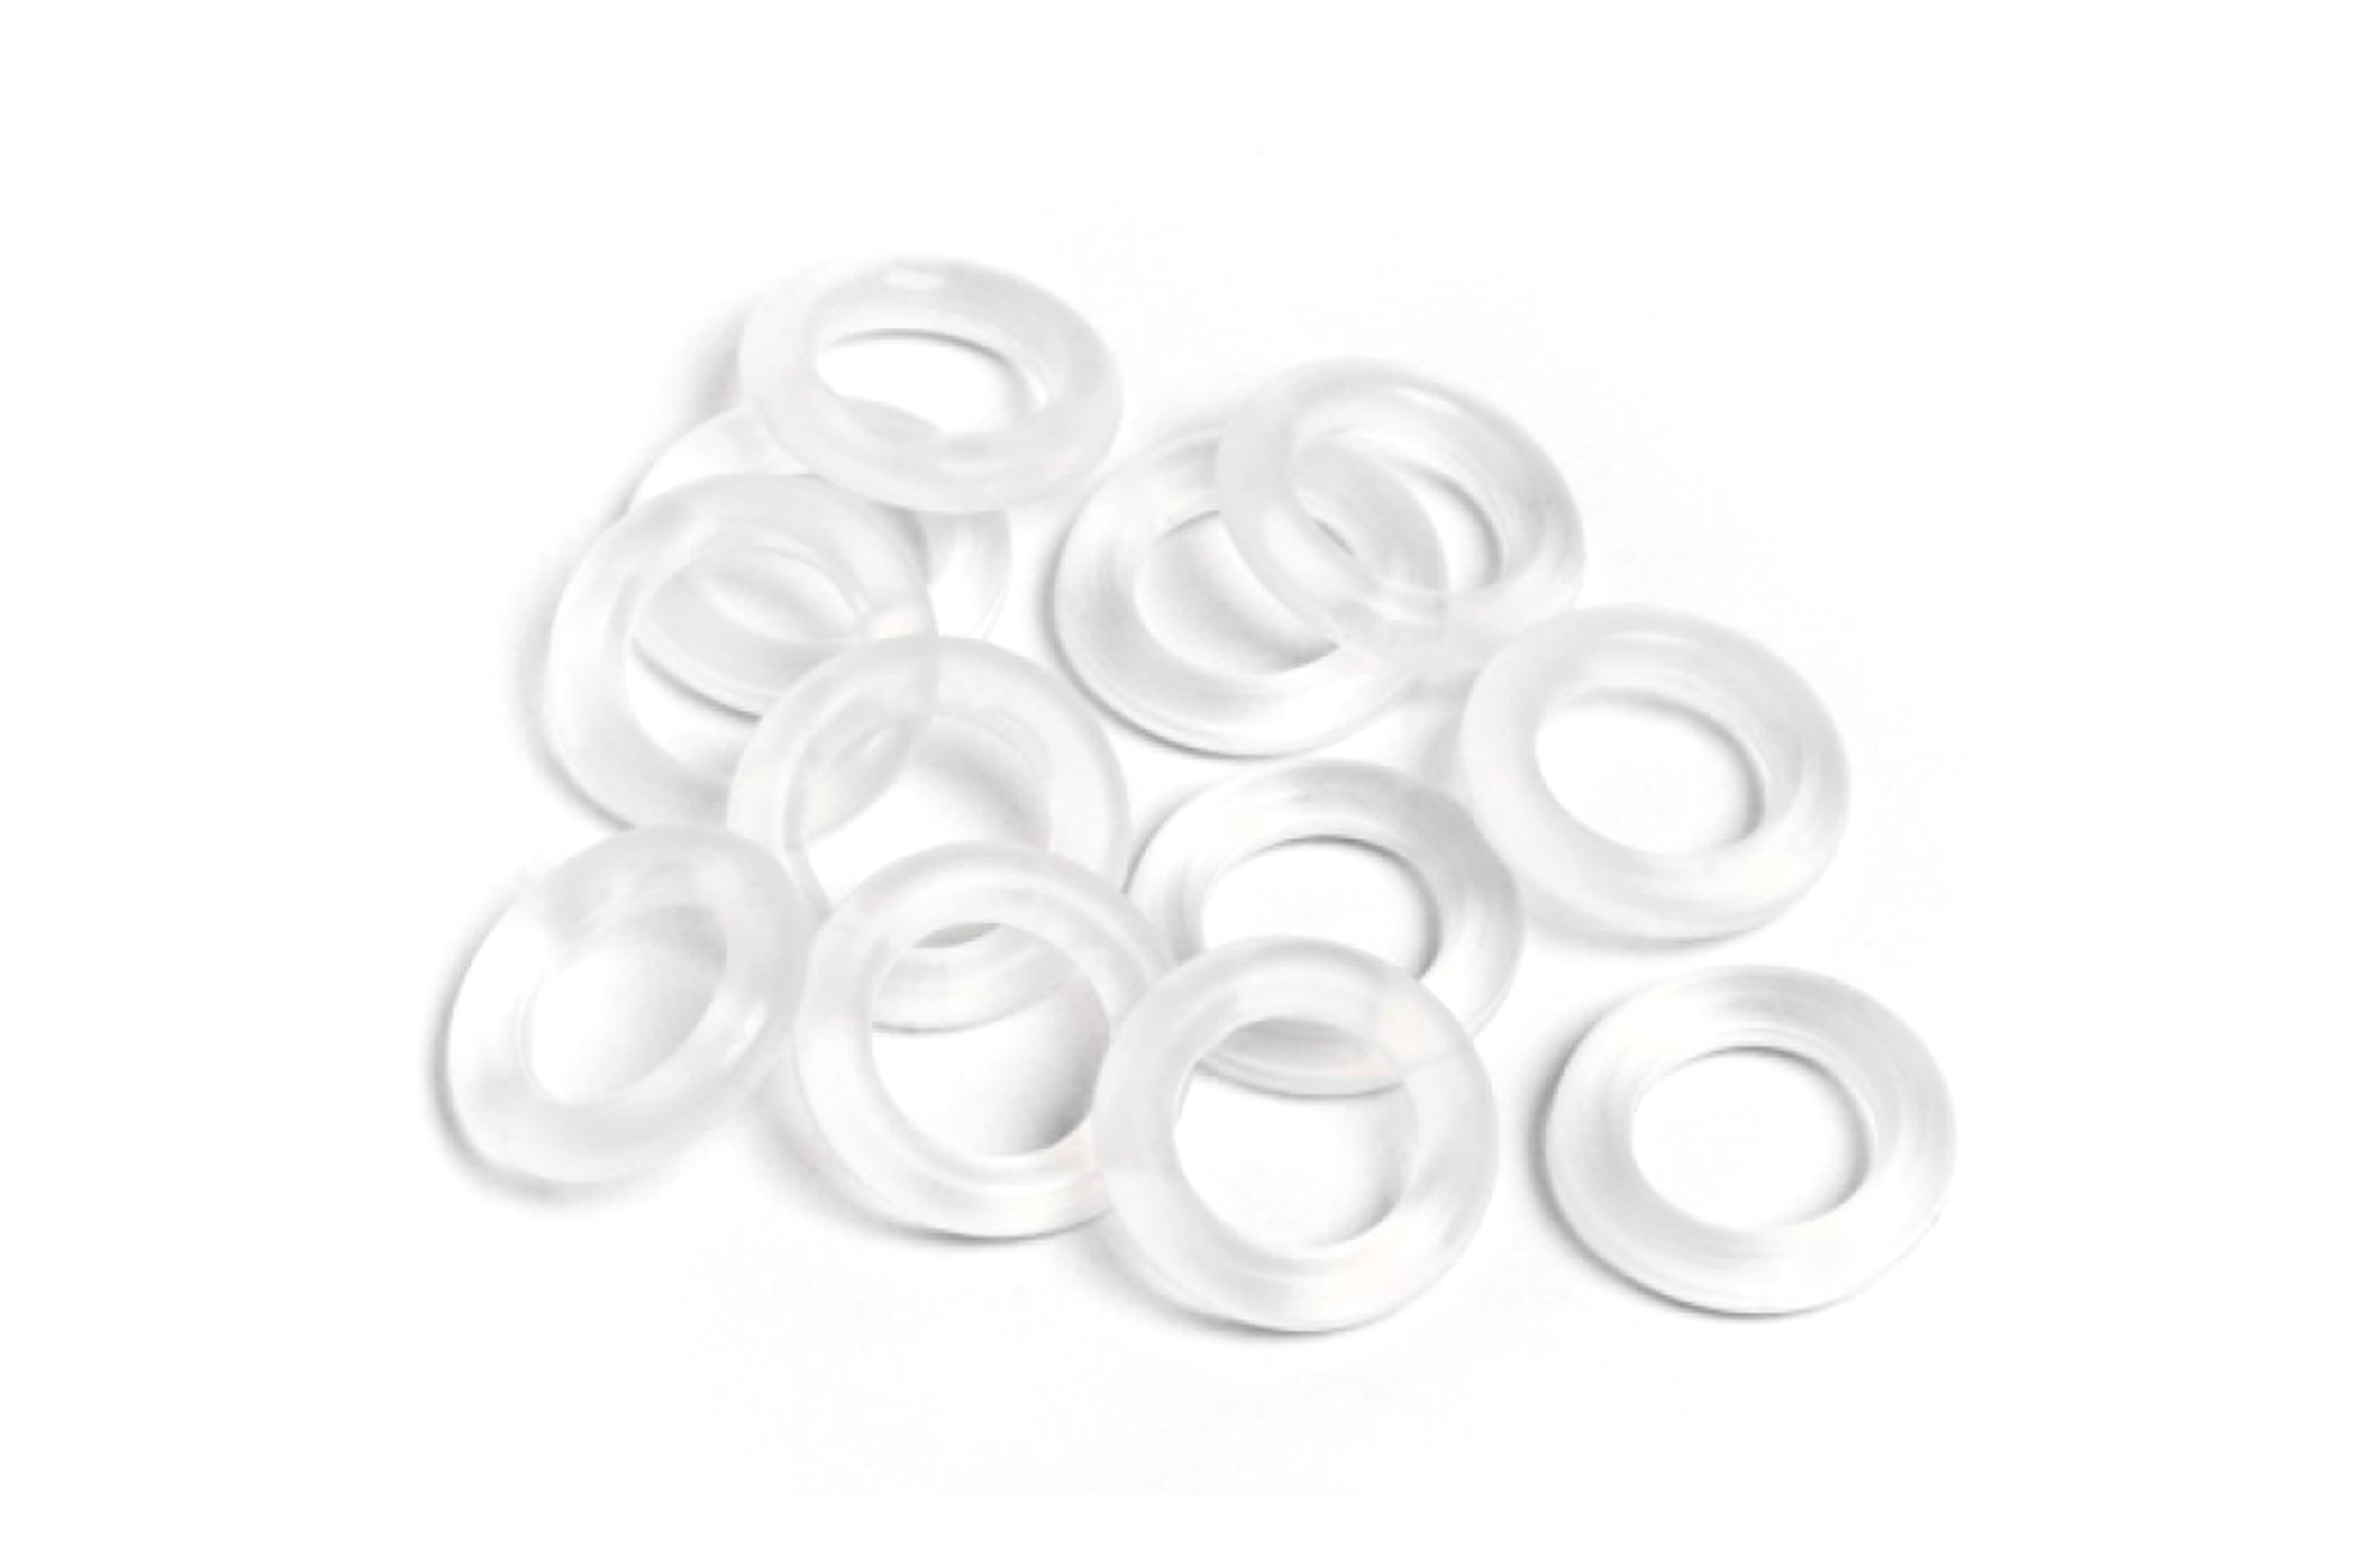 86927 HPI O-rings P6 6 x 2 mm, clear